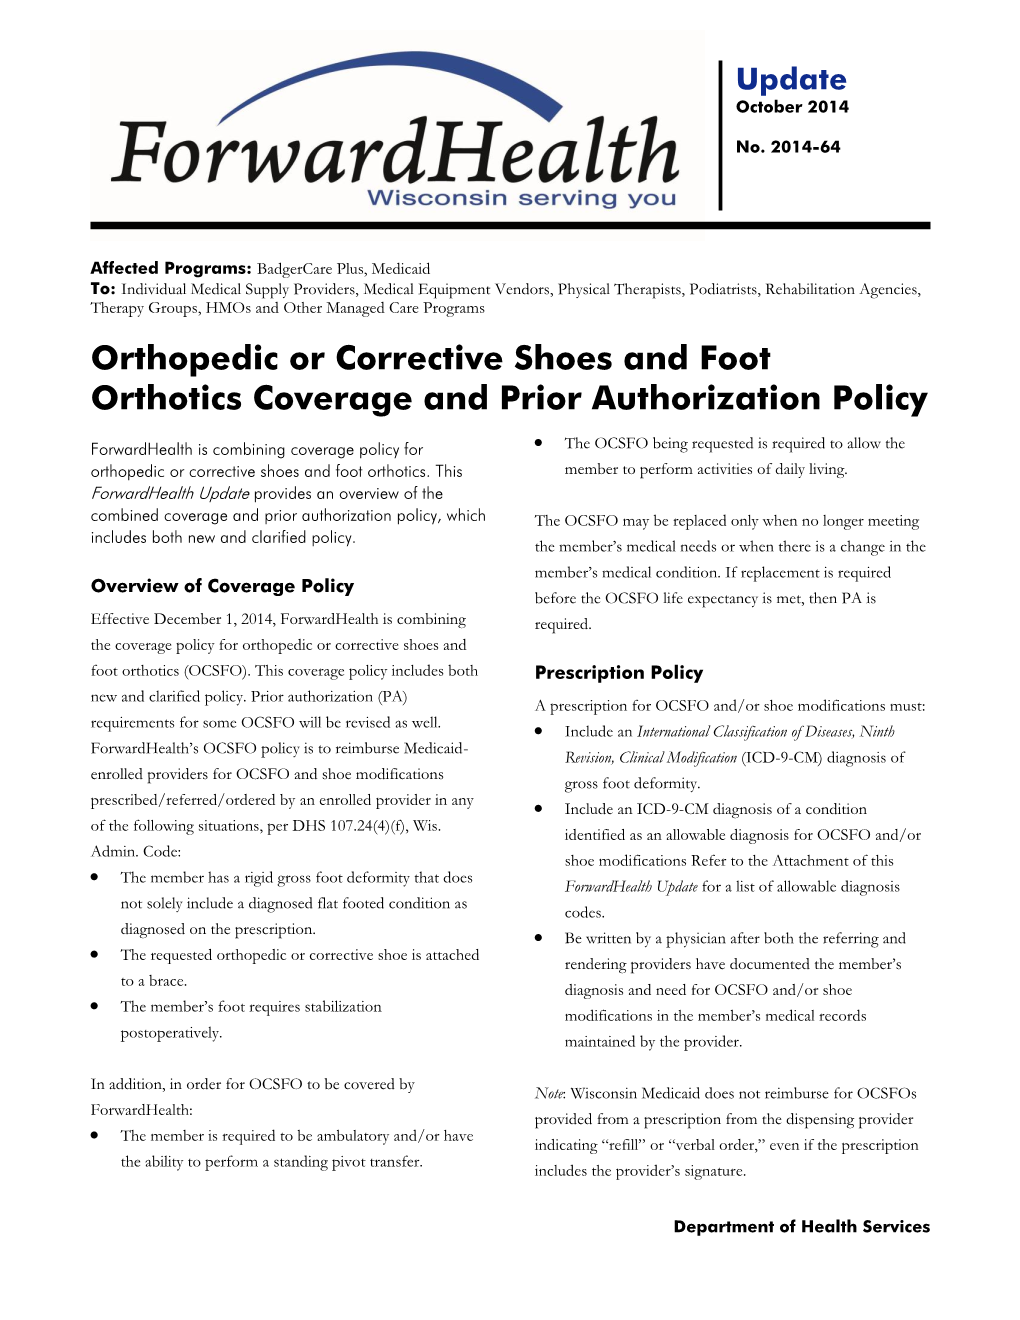 Orthopedic Or Corrective Shoes and Foot Orthotics Coverage and Prior Authorization Policy